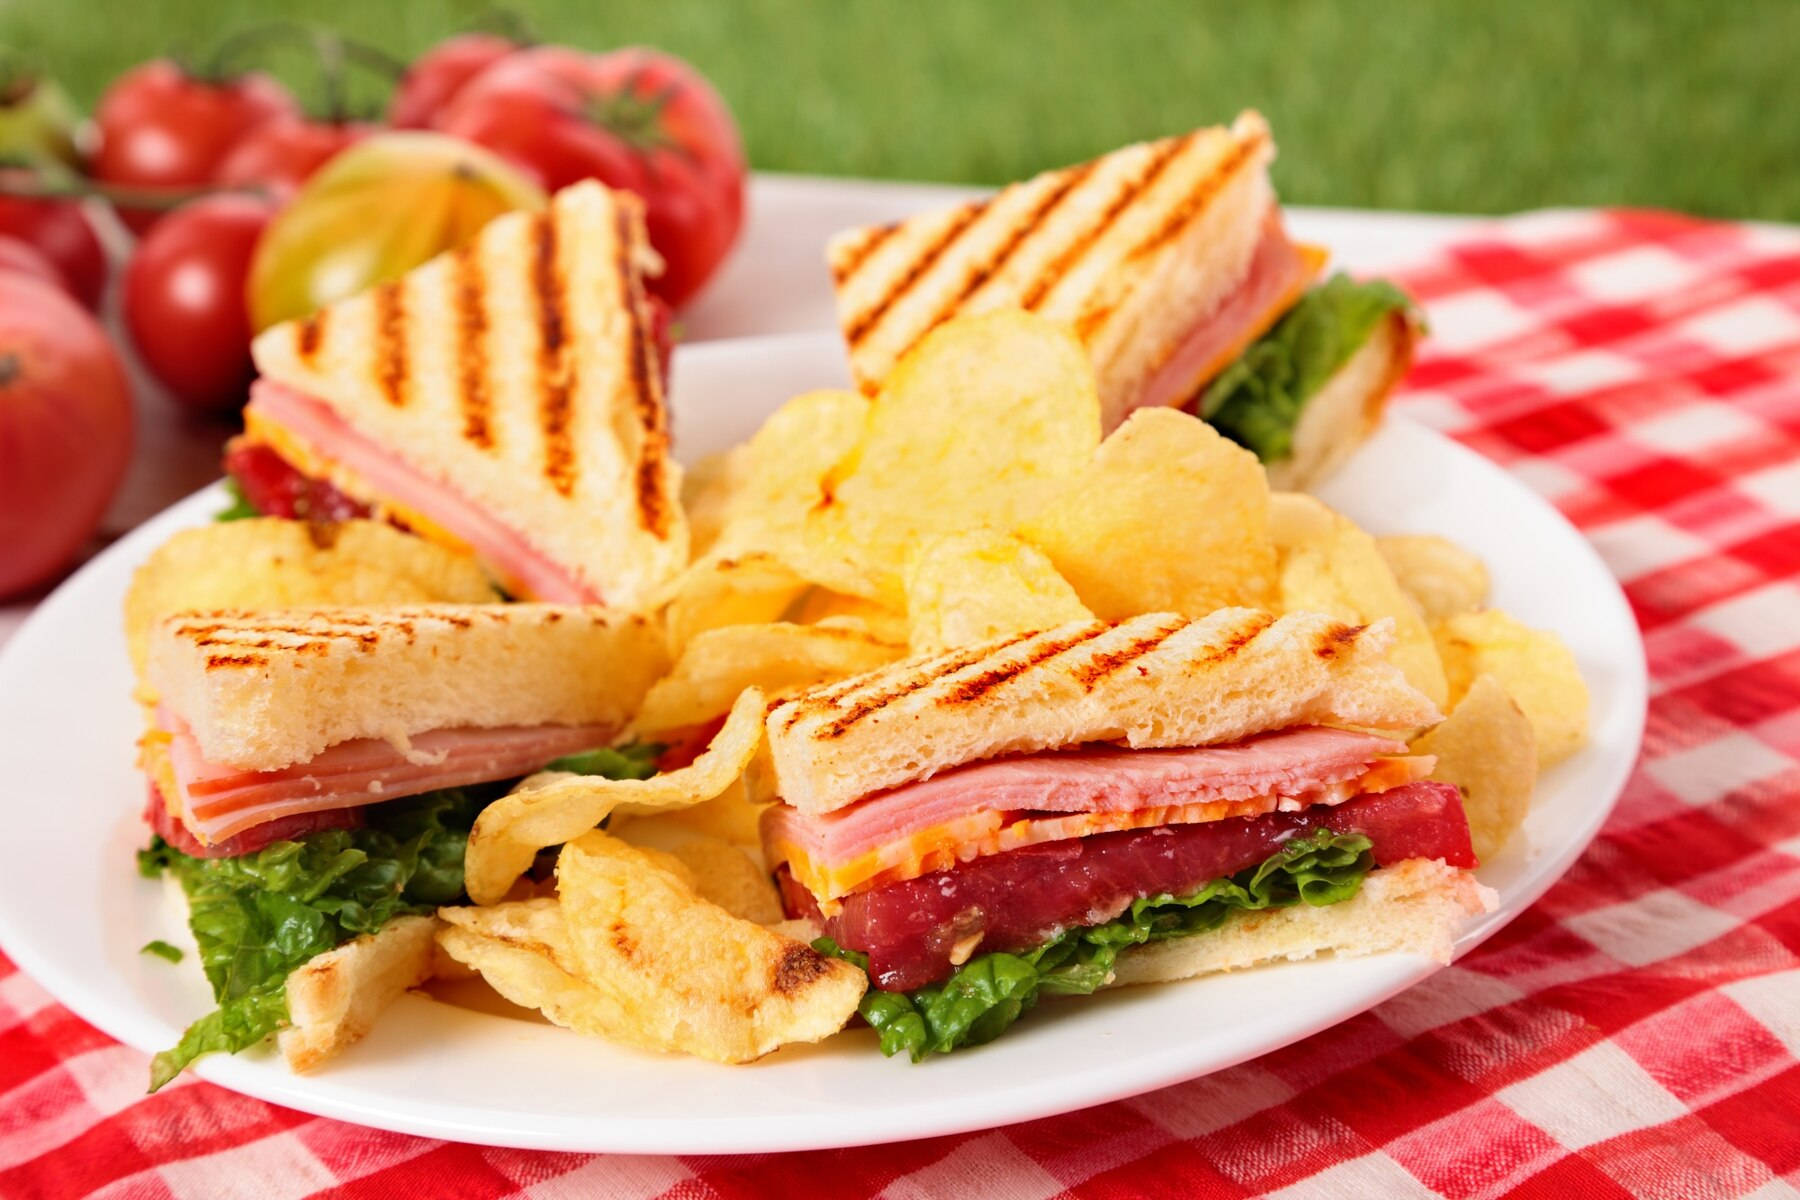 Delicious Grilled Sandwiches with Chips Wallpaper